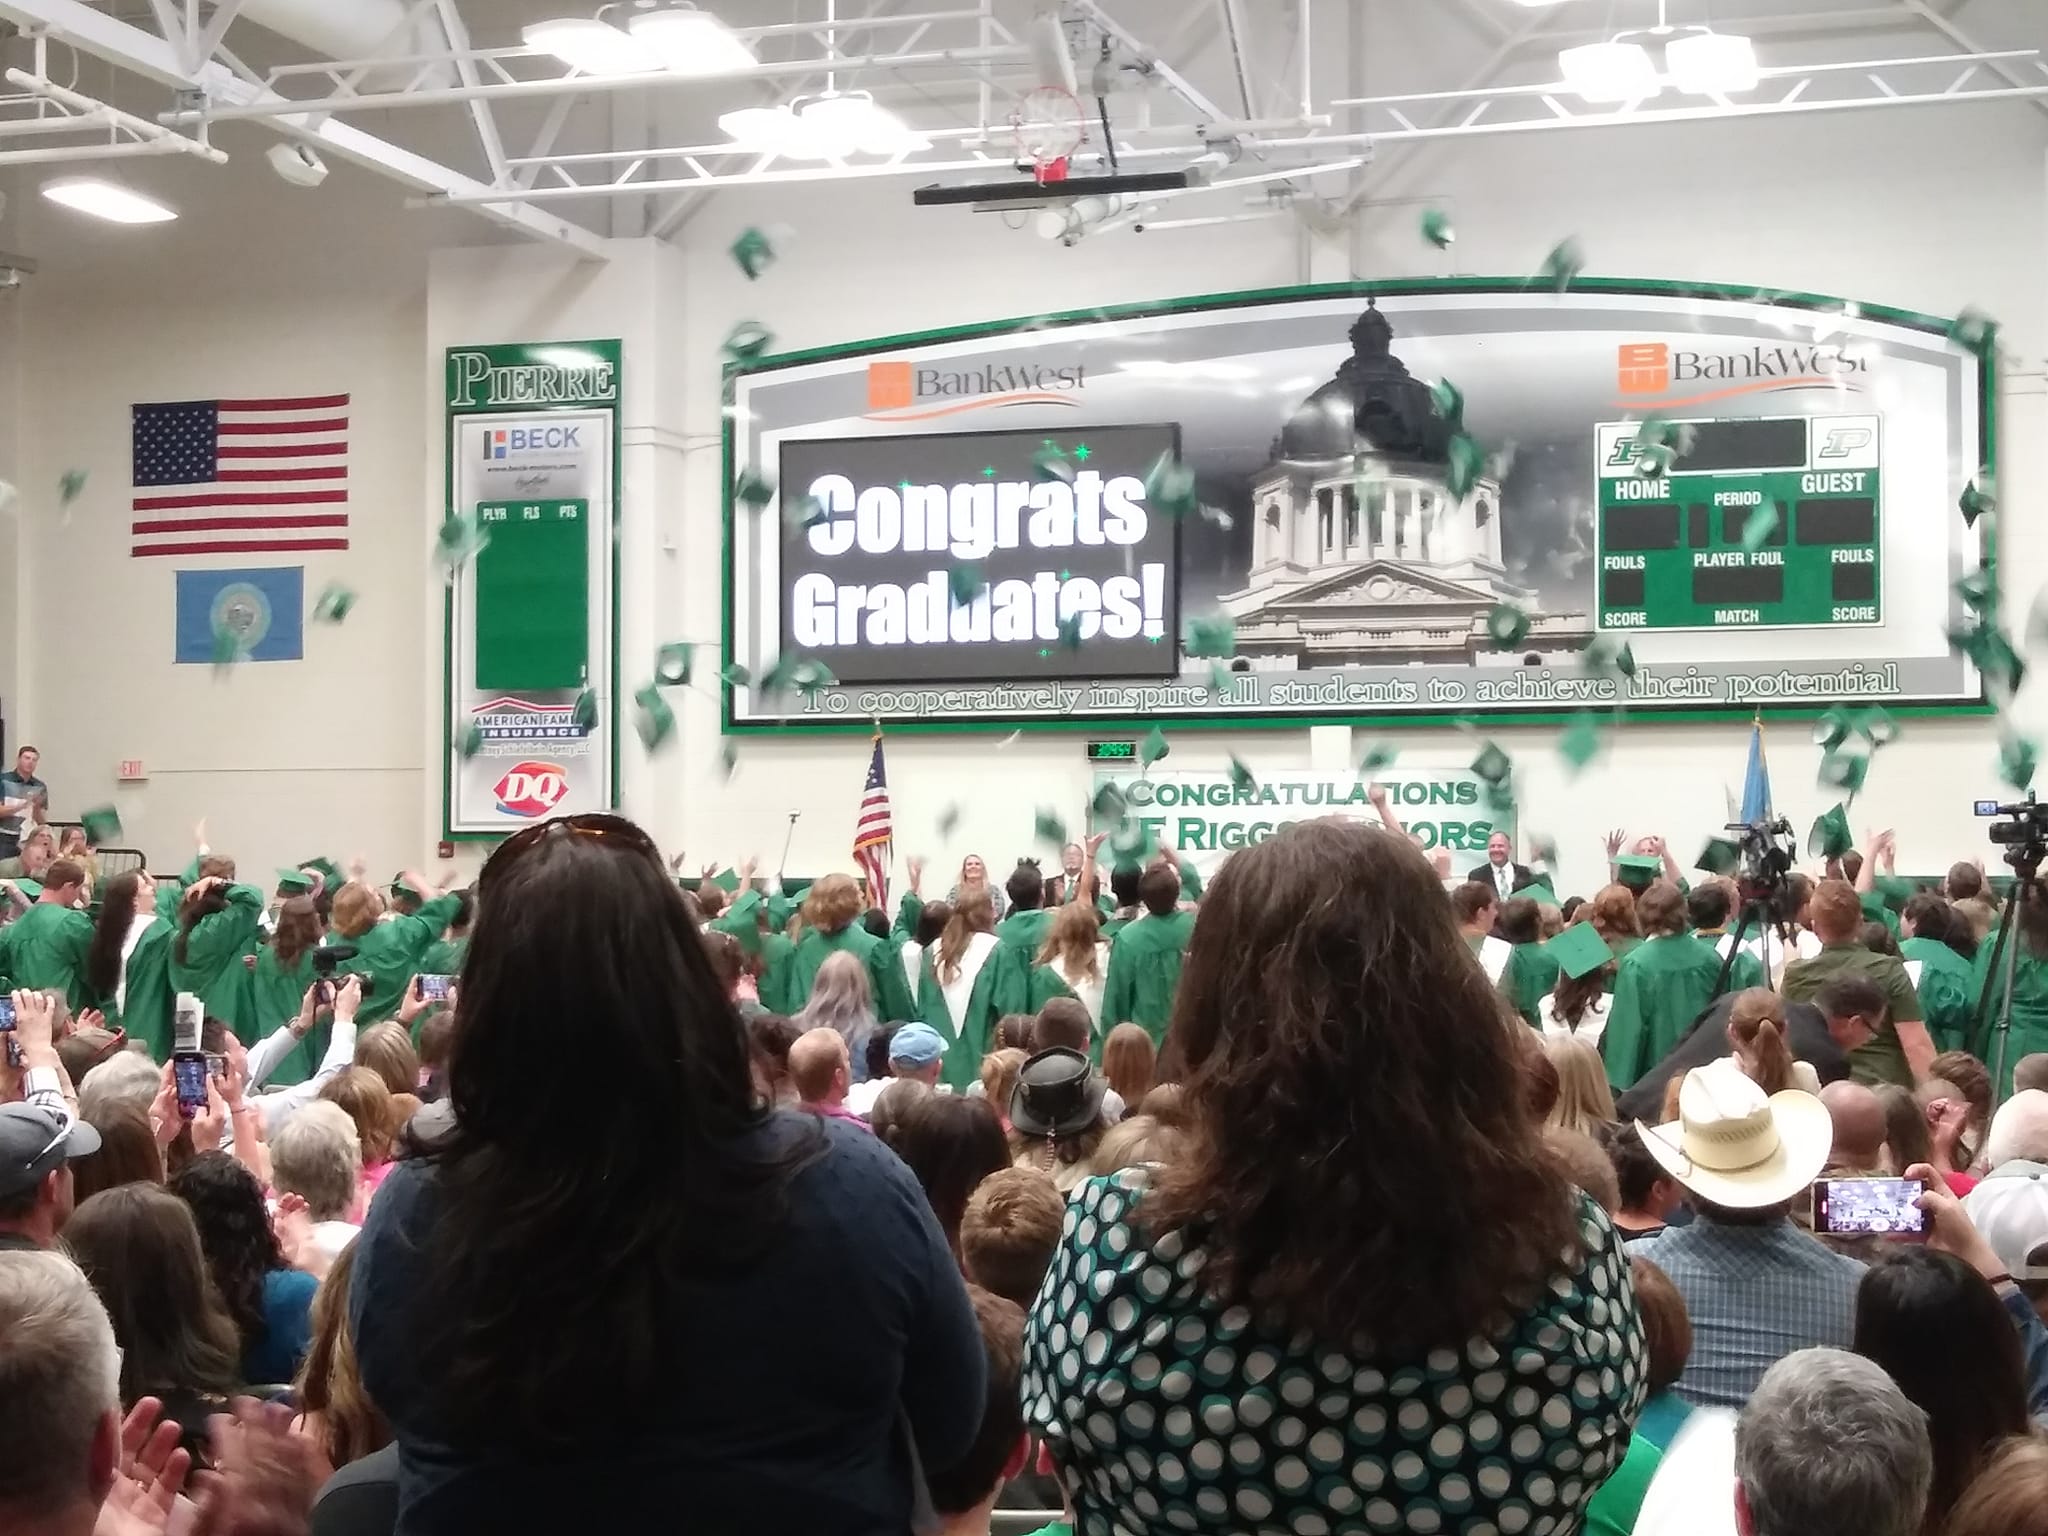 Pierre School District Sends Class Of 2022 Into The World With Graduation Sunday